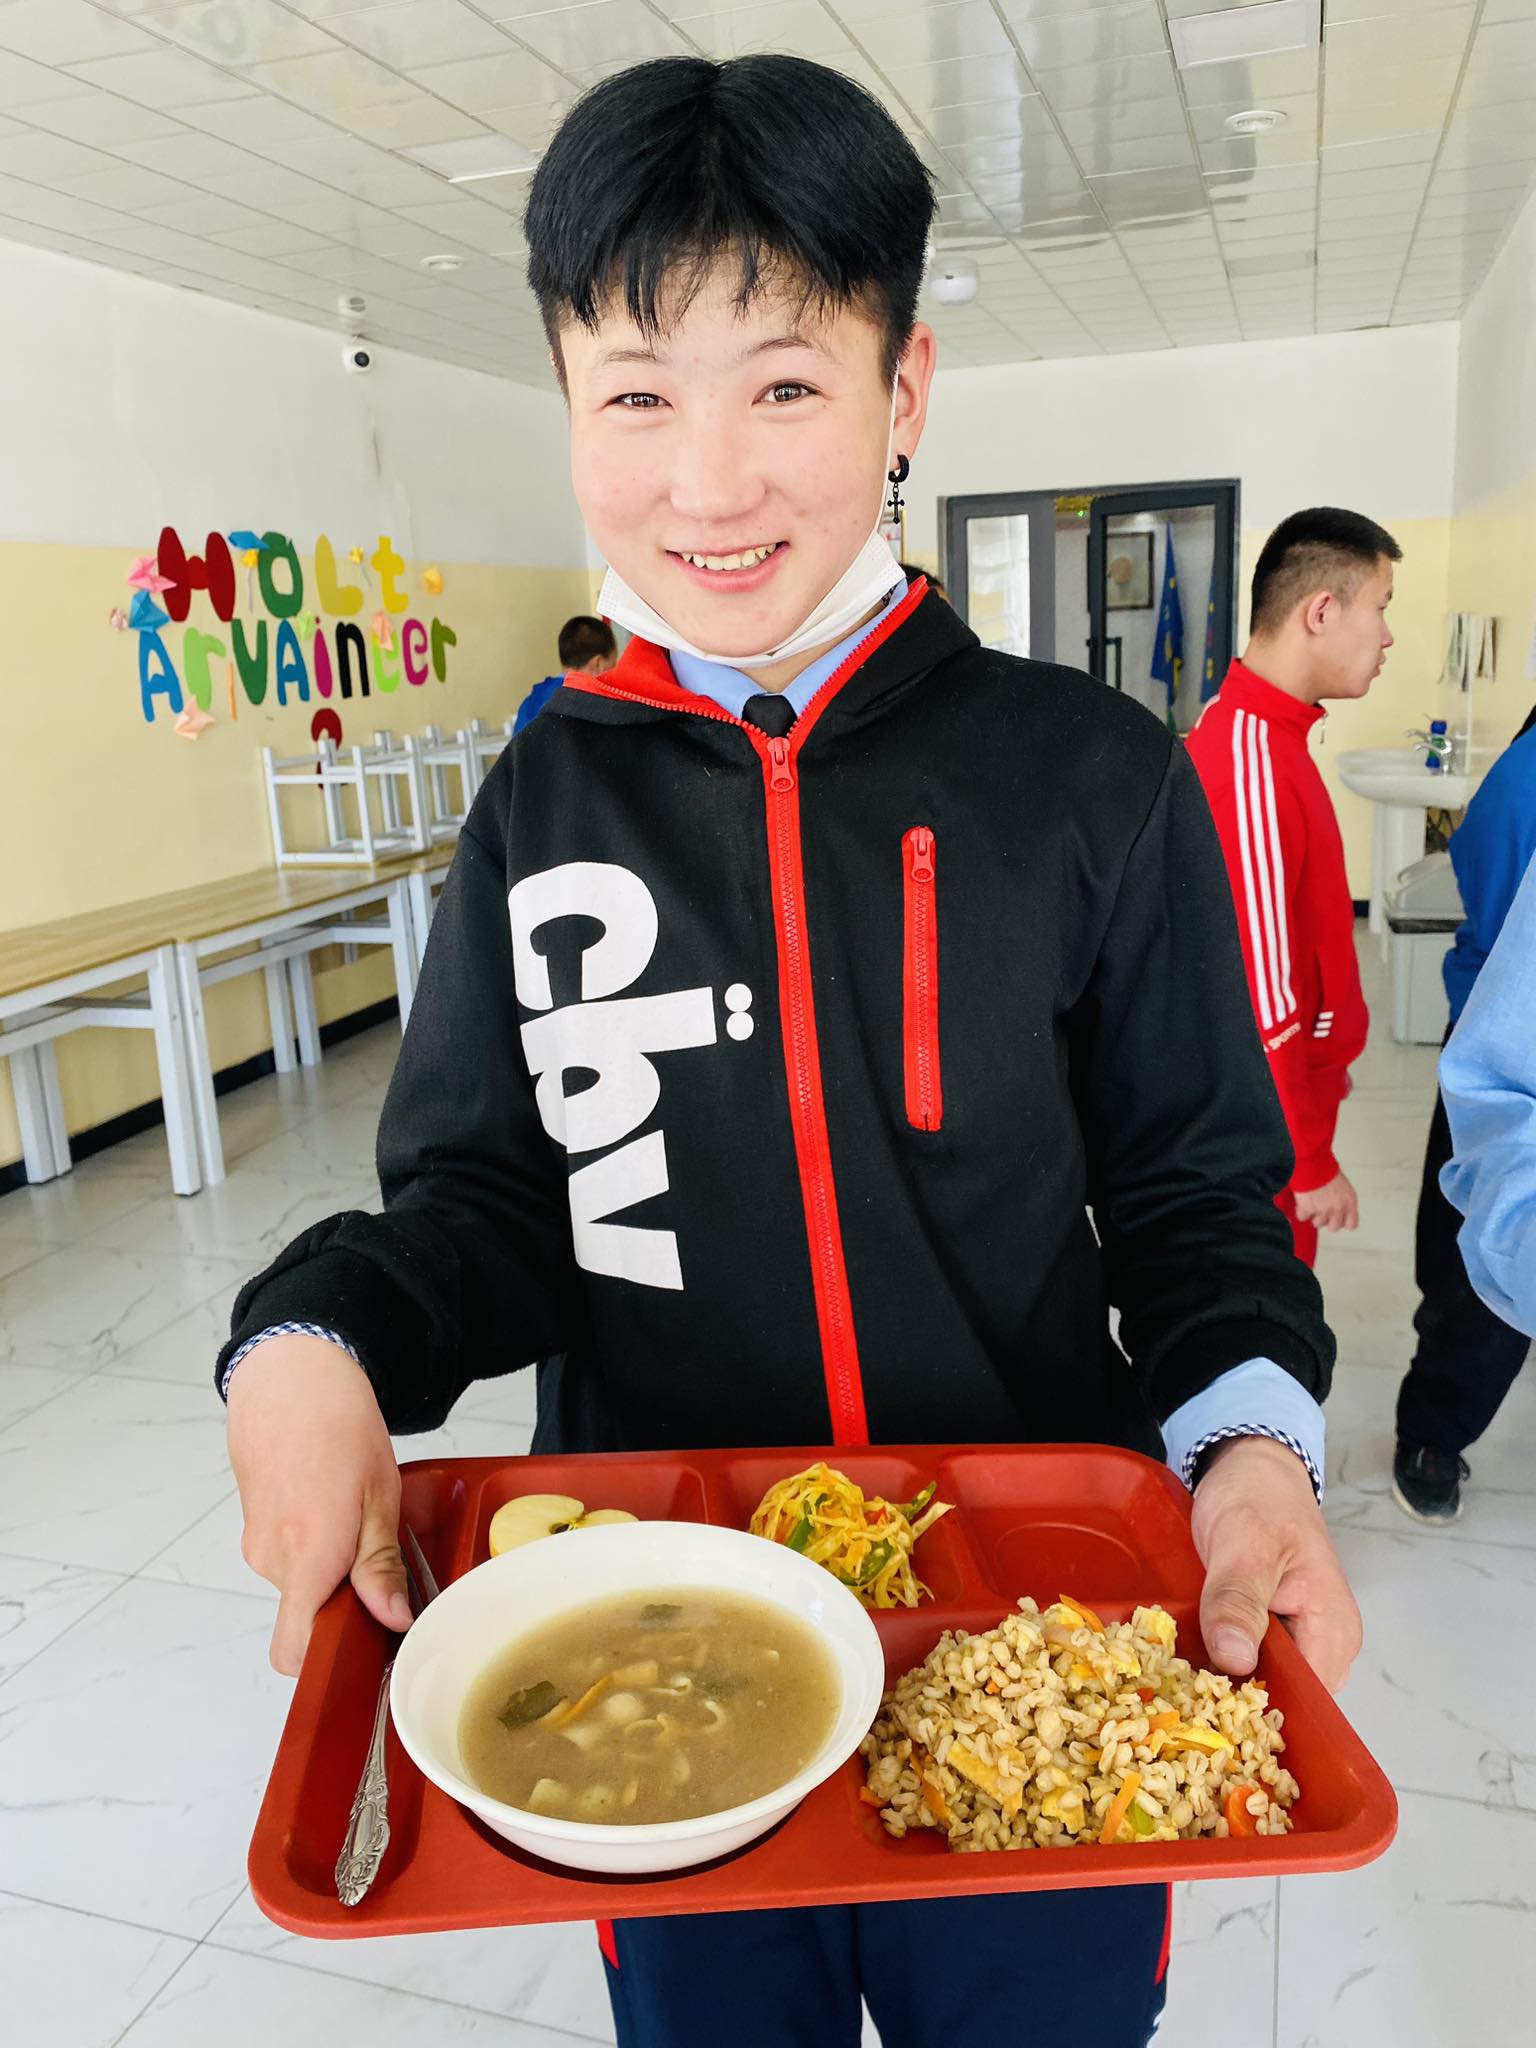 Young person holds school lunch tray, smiling.